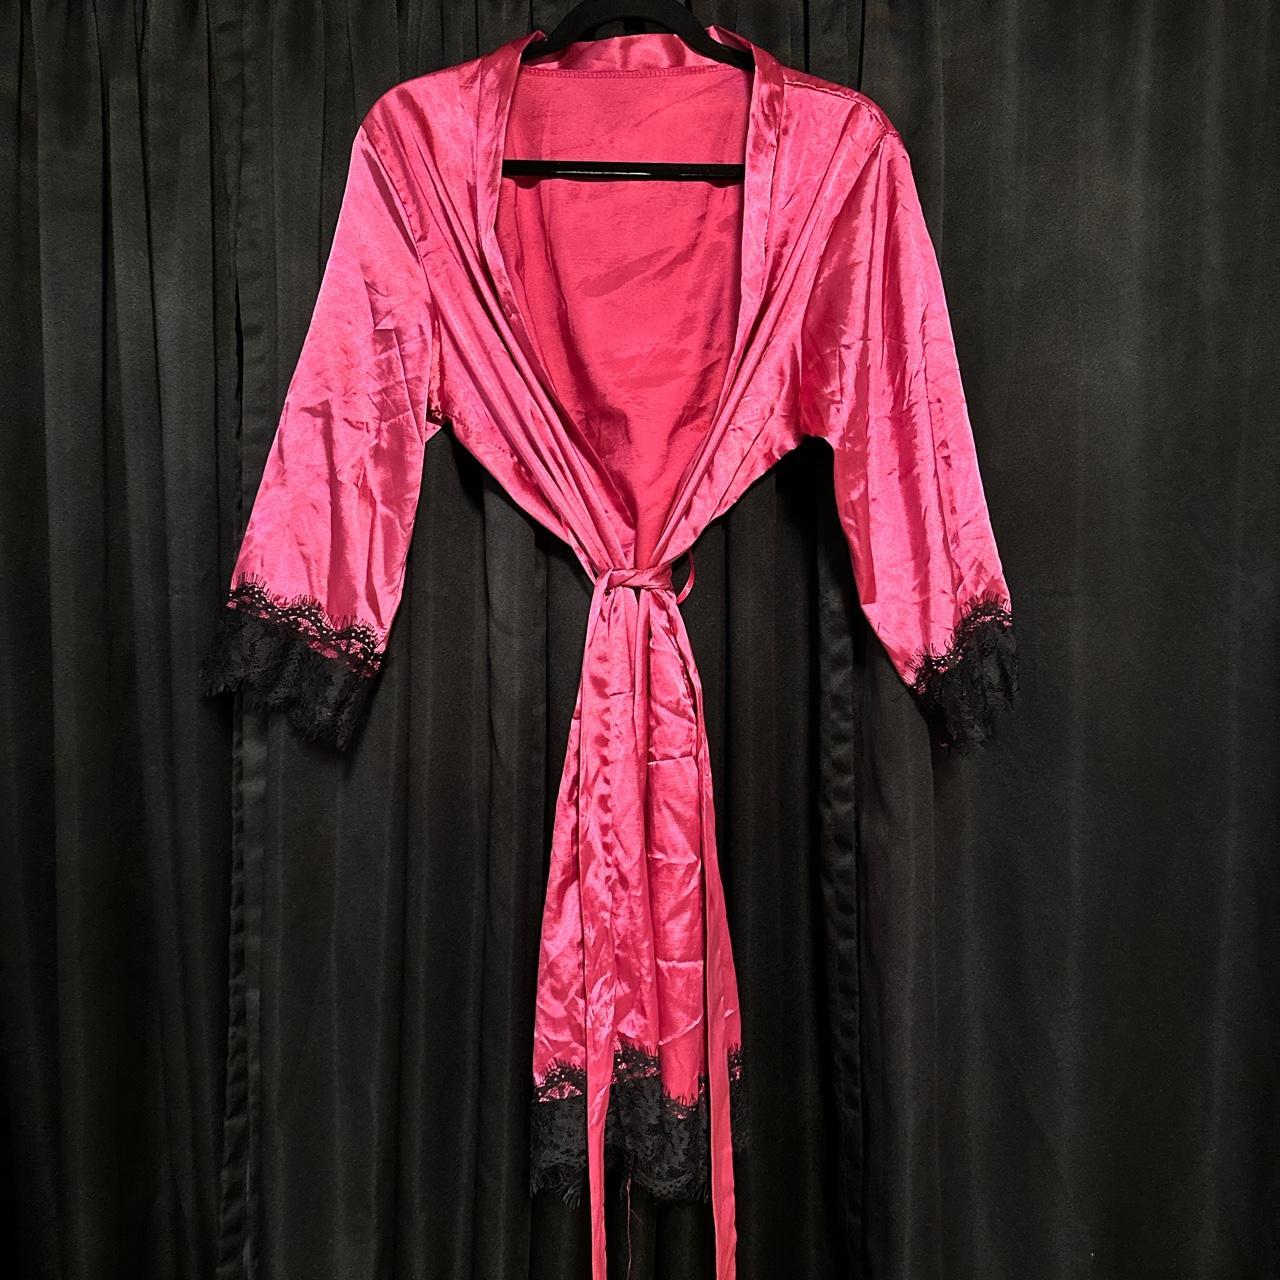 Women's Black and Pink Robe